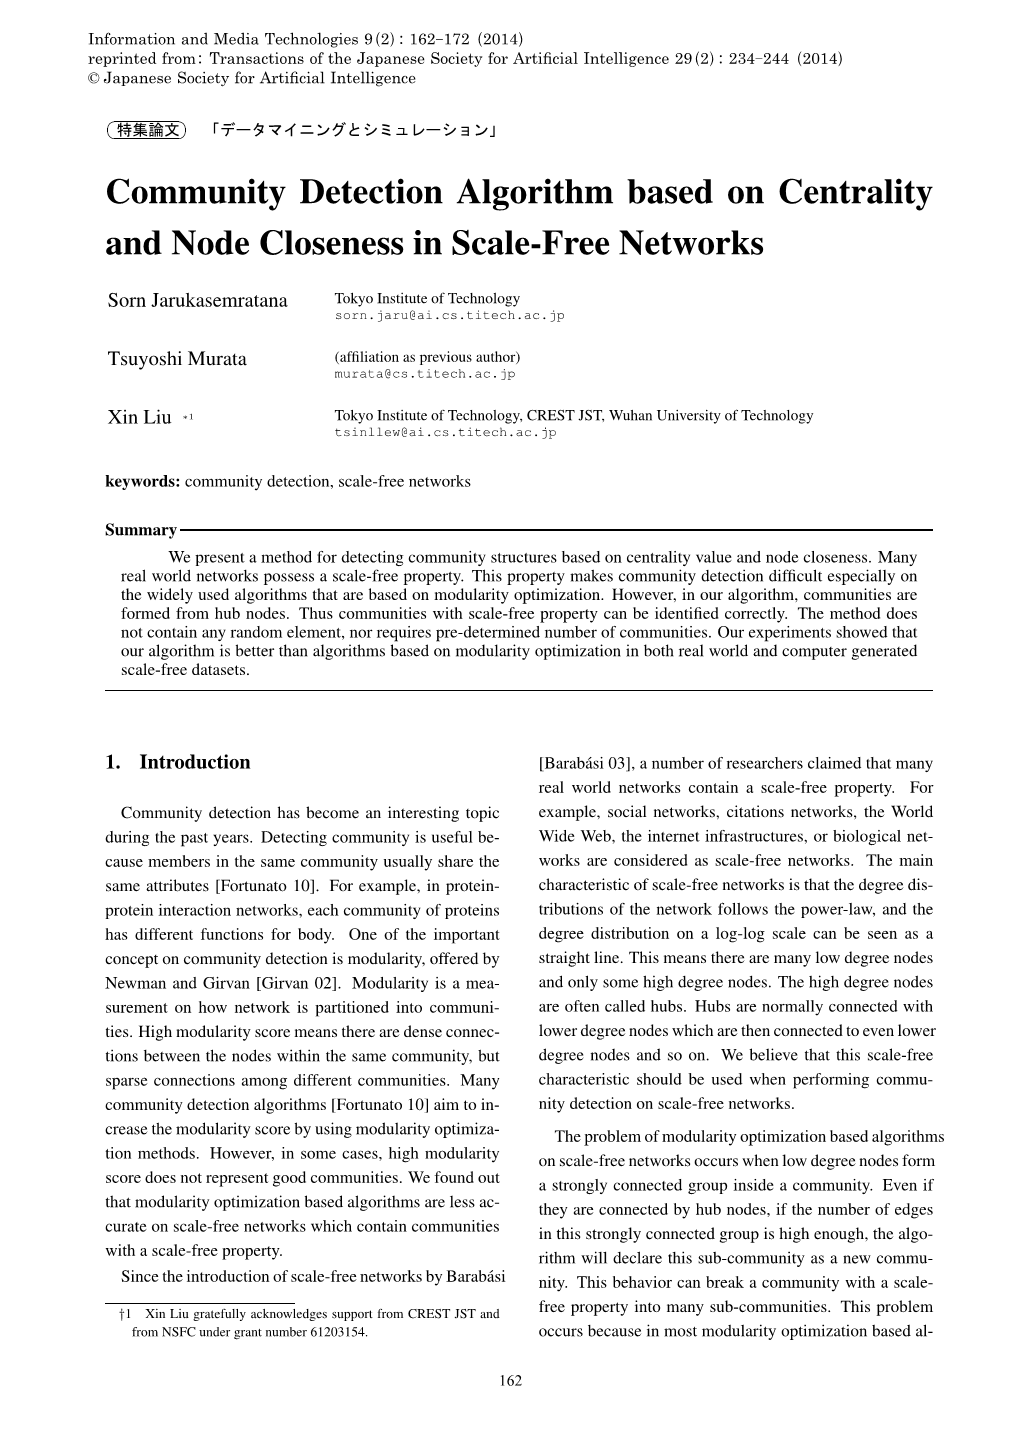 Community Detection Algorithm Based on Centrality and Node Closeness in Scale-Free Networks